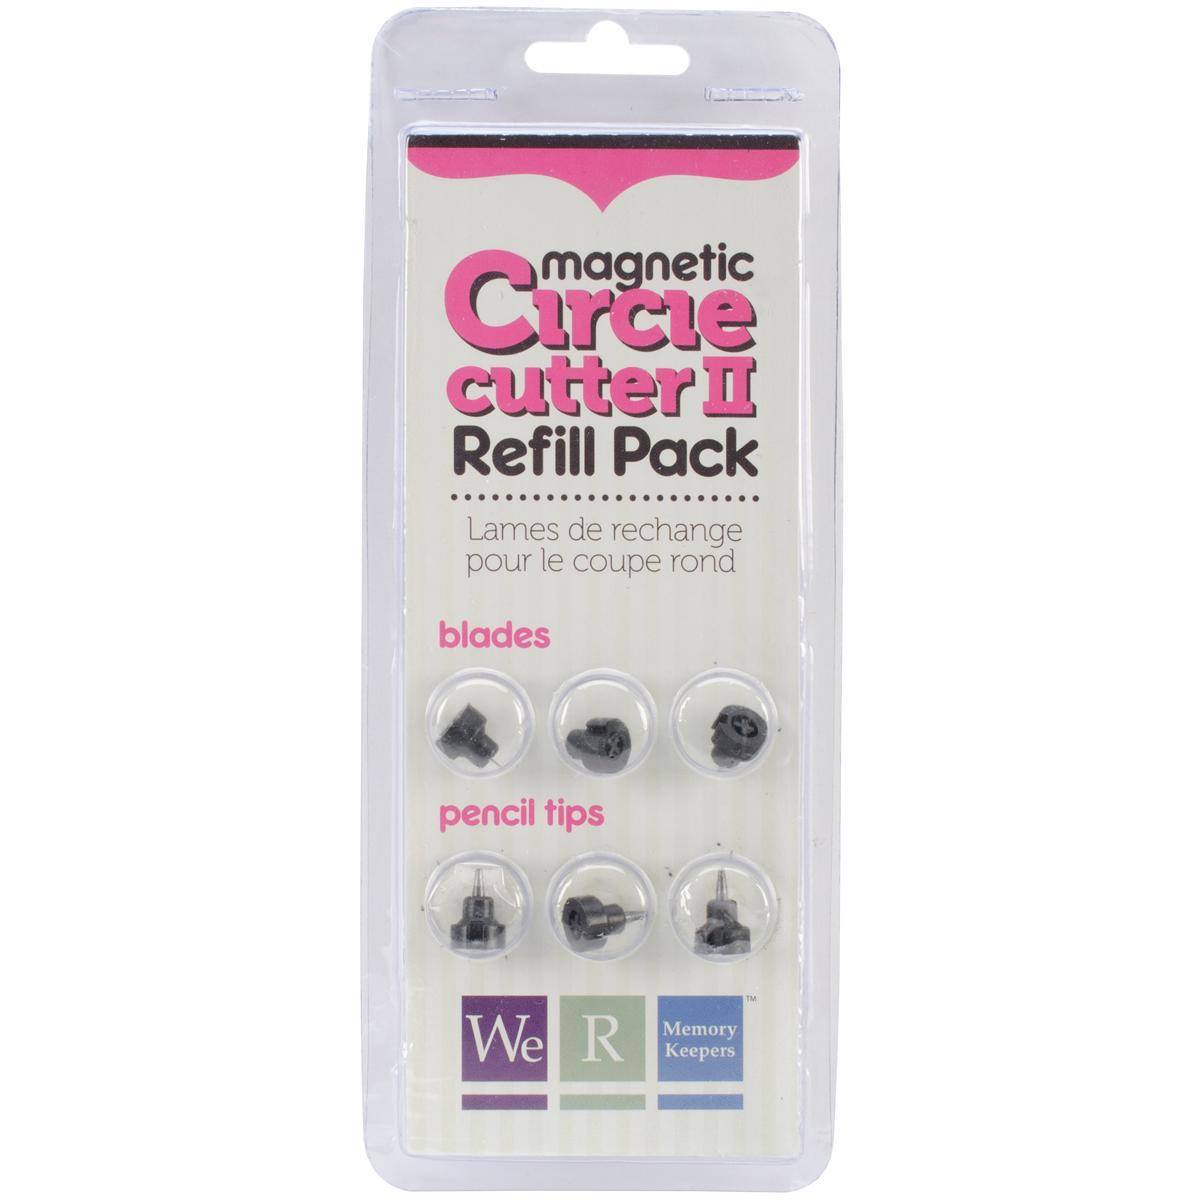 Magnetic Circle Cutter Ii Refill Blades   Pencil Tips 6/pkg   For 71047